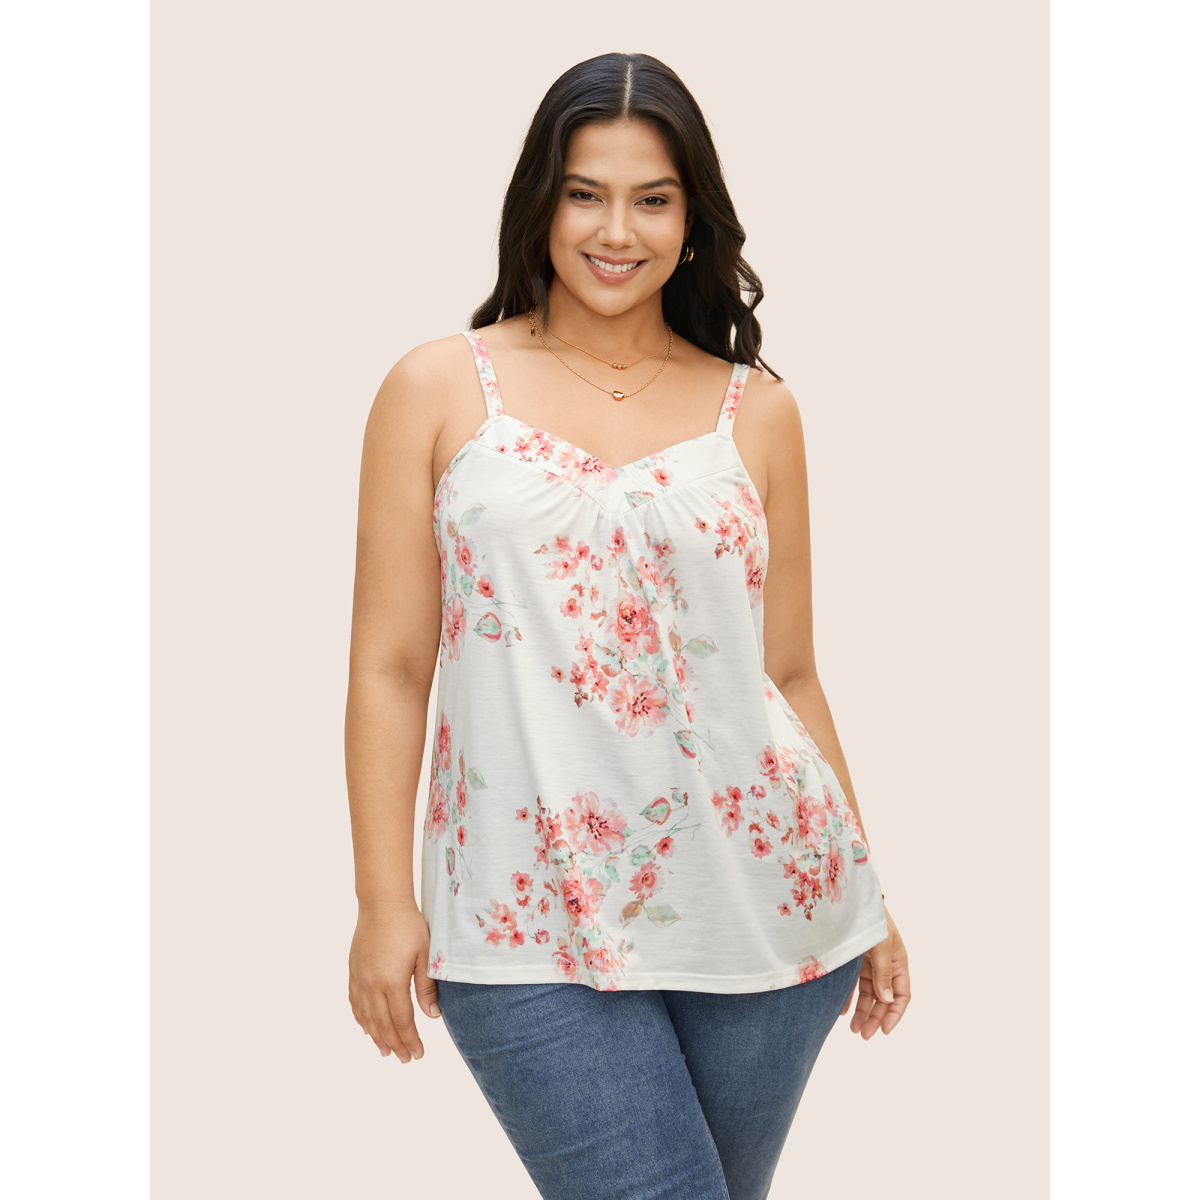 

Plus Size Natural Flowers Adjustable Straps Cami Top Women Crepe Elegant Contrast Non Everyday Tank Tops Camis BloomChic